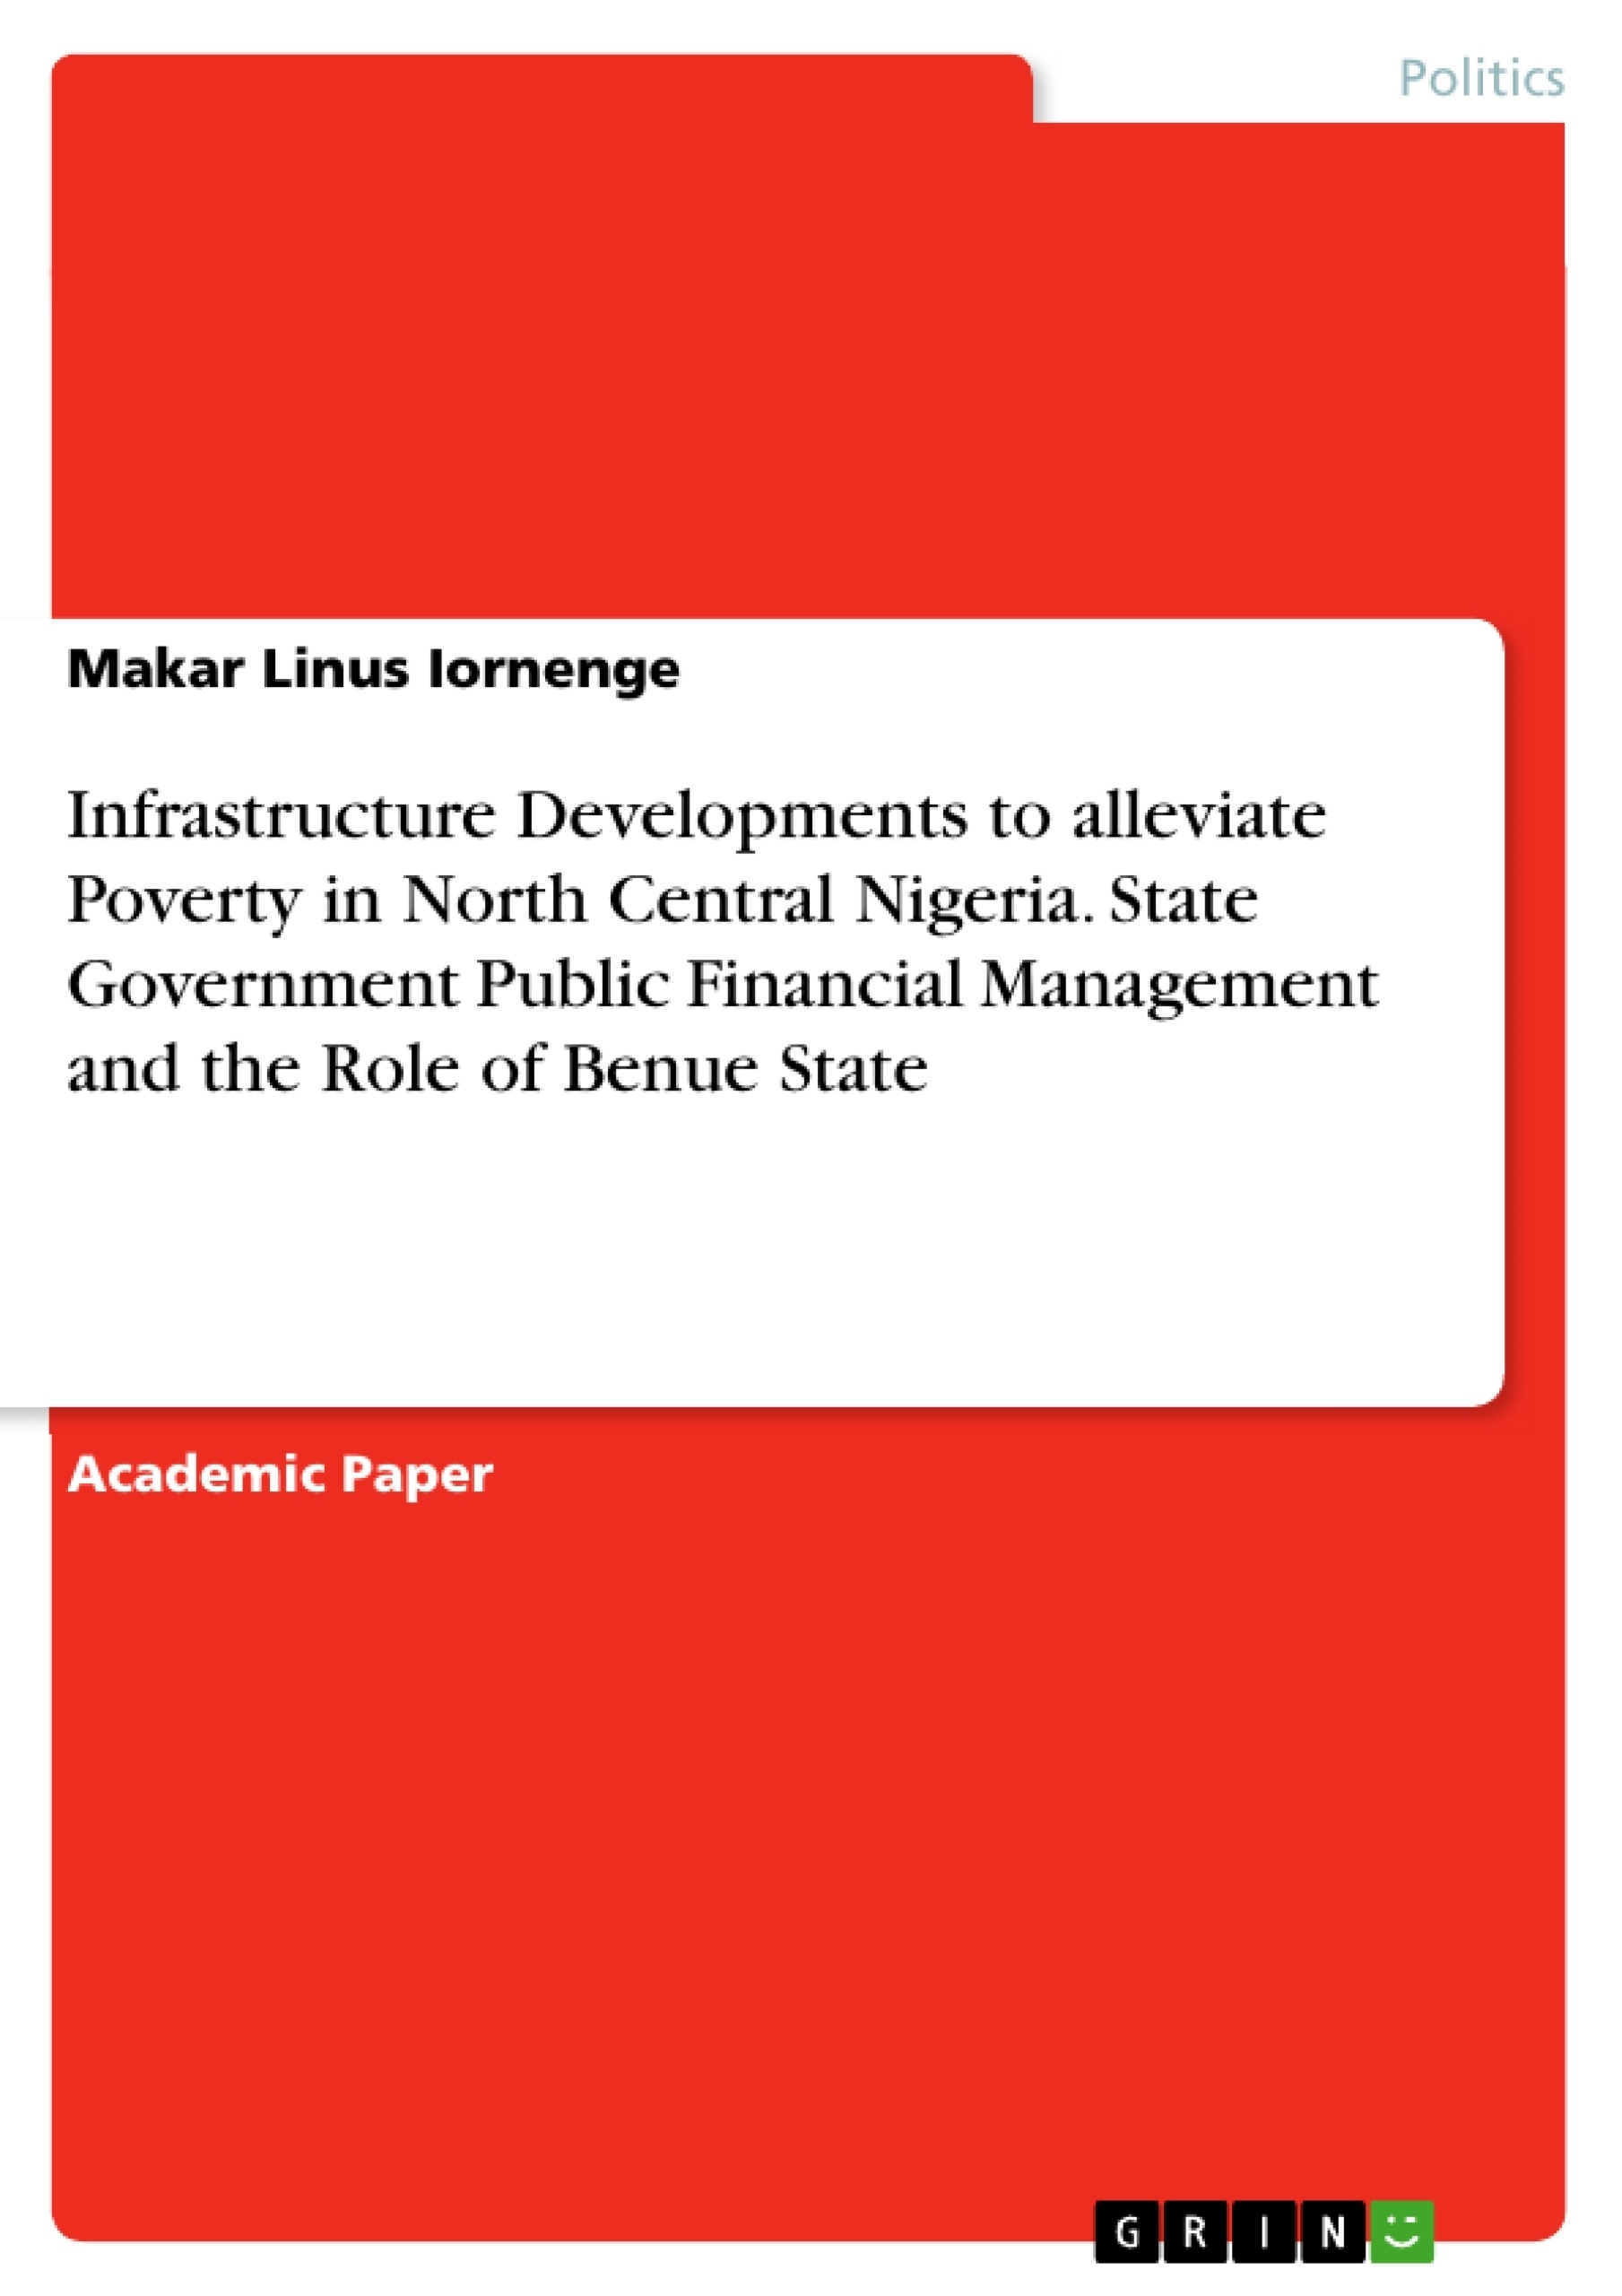 Title: Infrastructure Developments to alleviate Poverty in North Central Nigeria. State Government Public Financial Management and the Role of Benue State